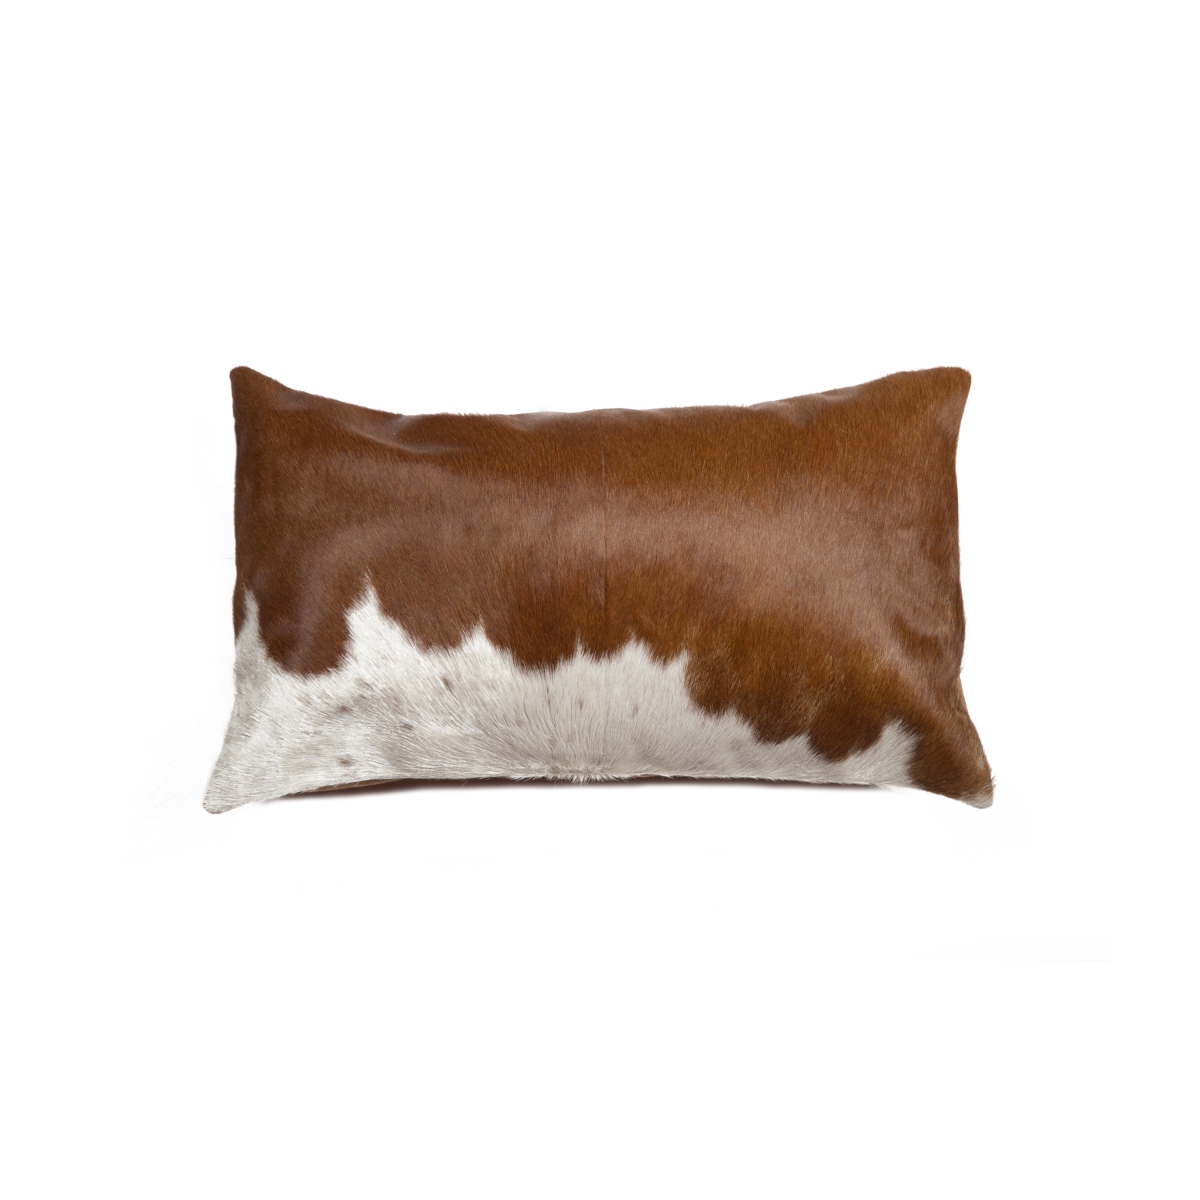 676685025463 12 X 20 In. Torino Cowhide Pillow - Brown & White